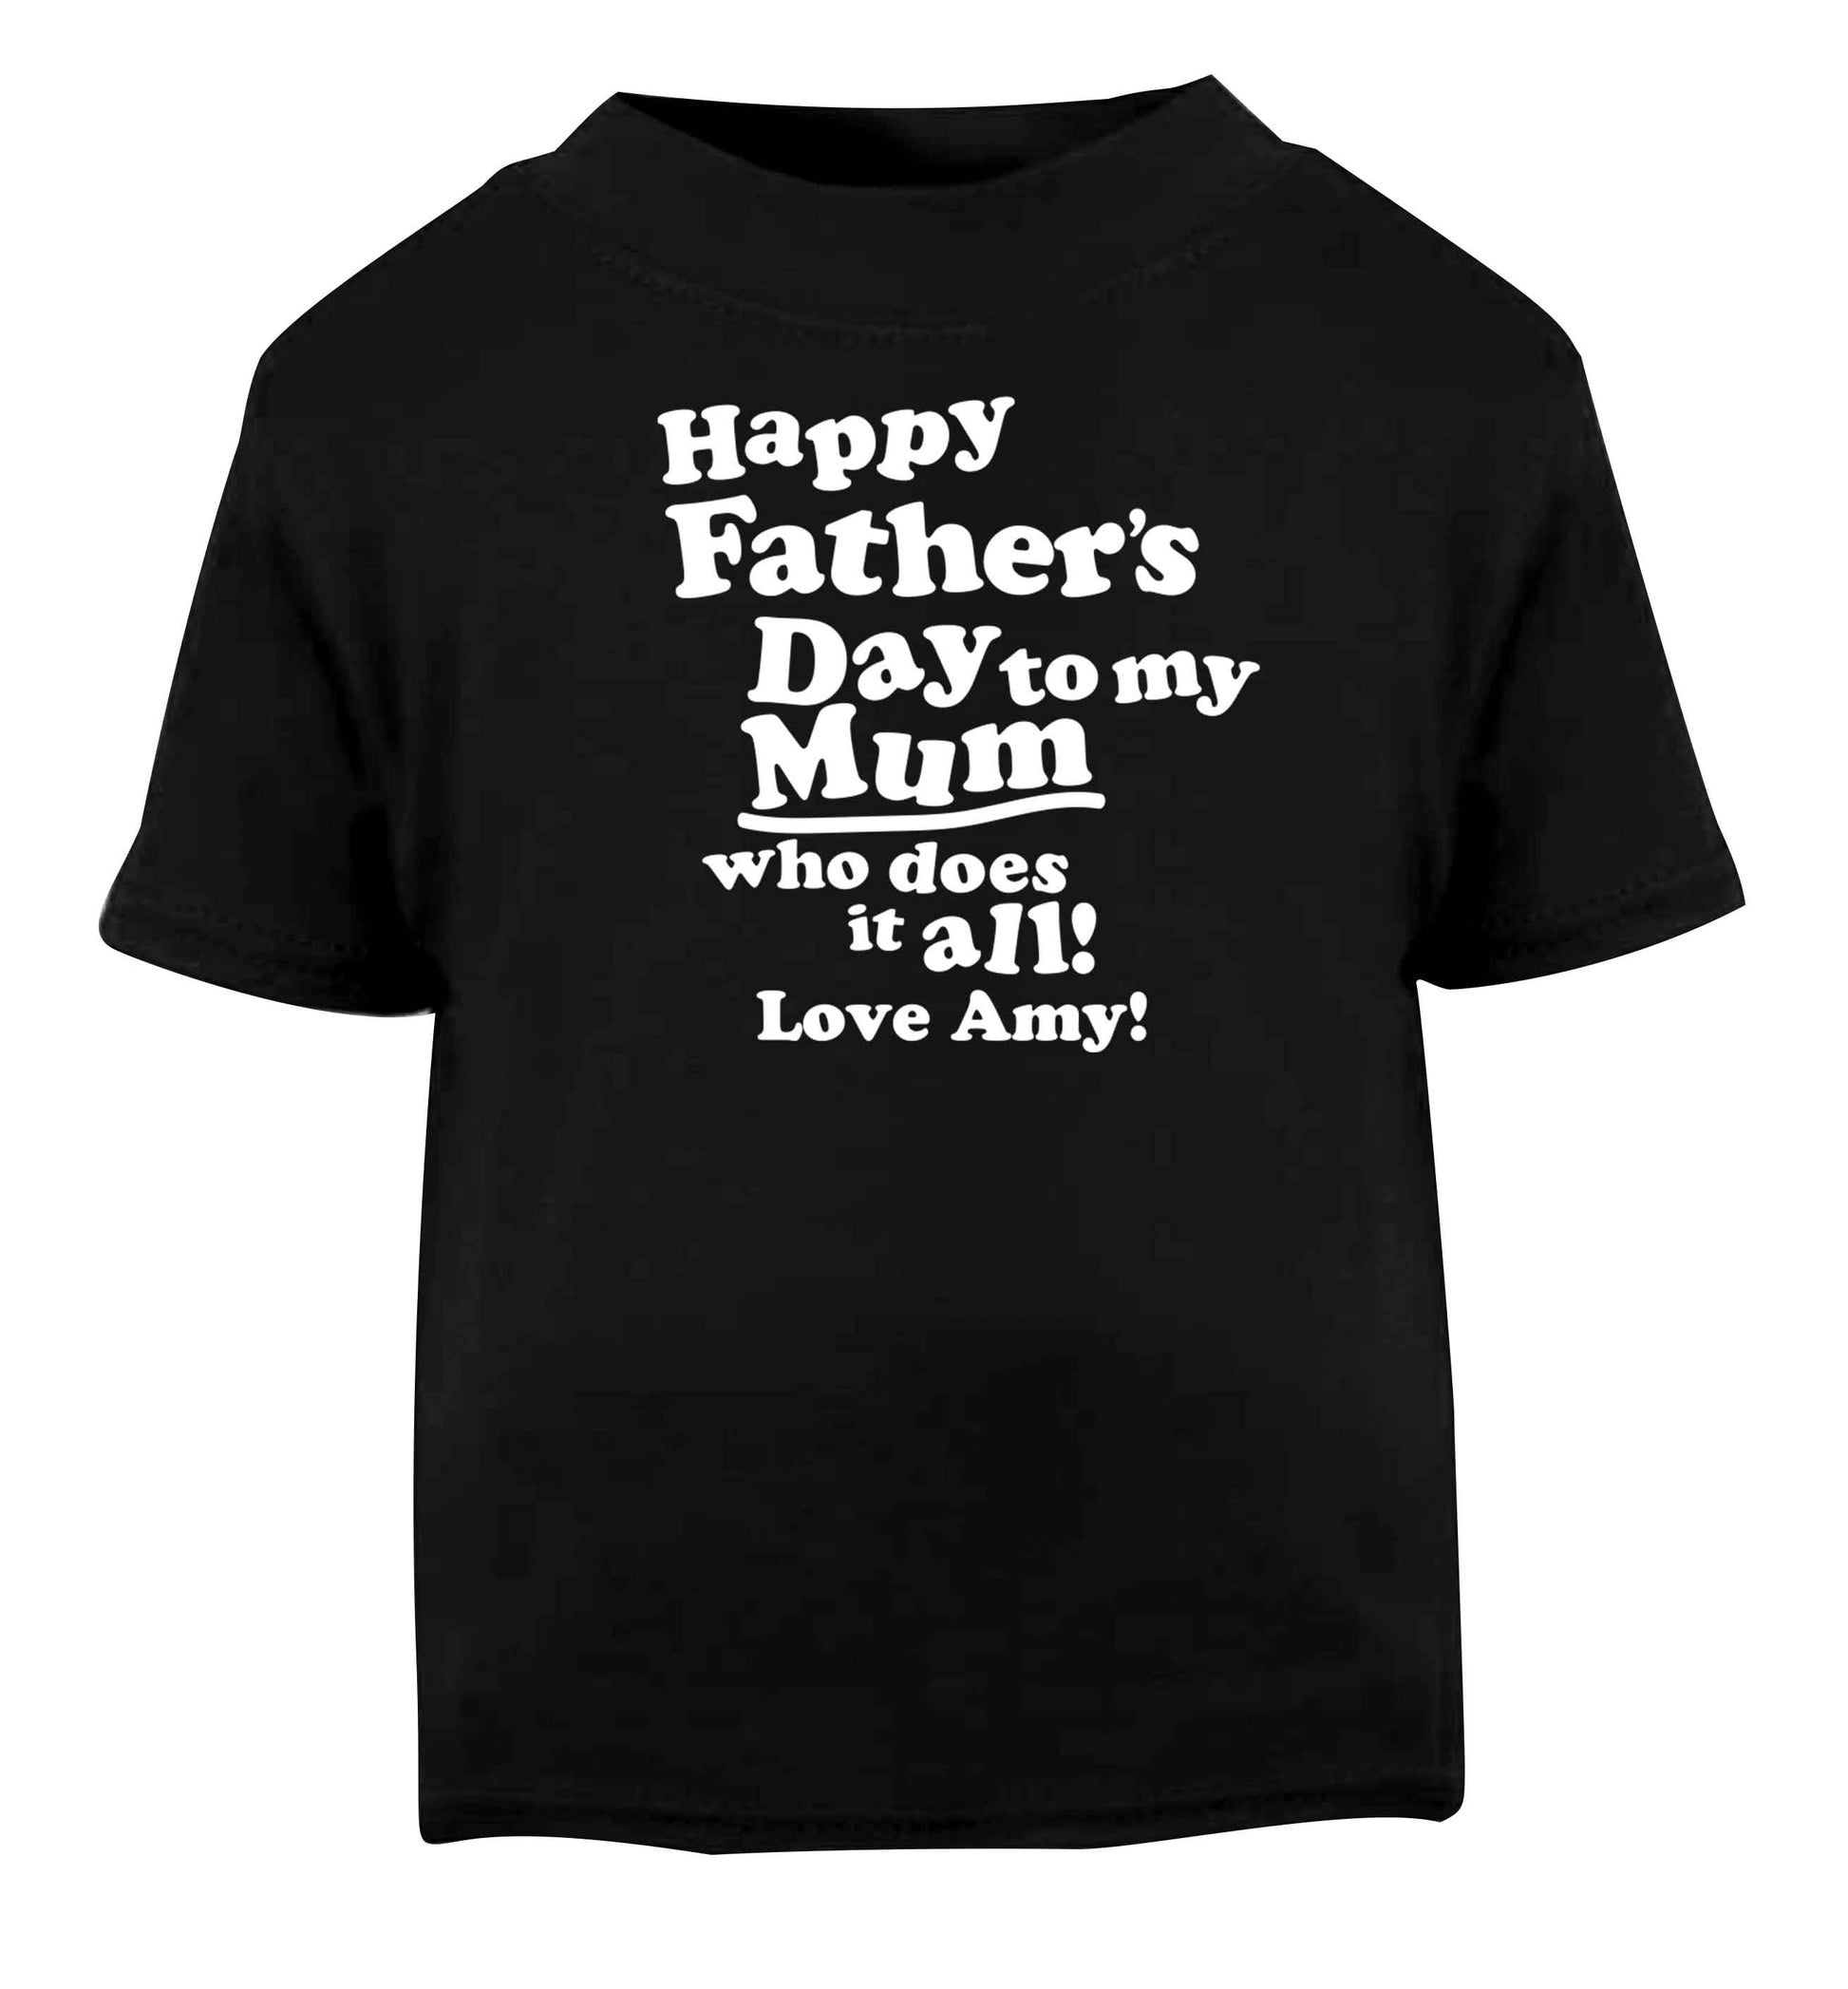 Happy Father's day to my mum who does it all Black baby toddler Tshirt 2 years